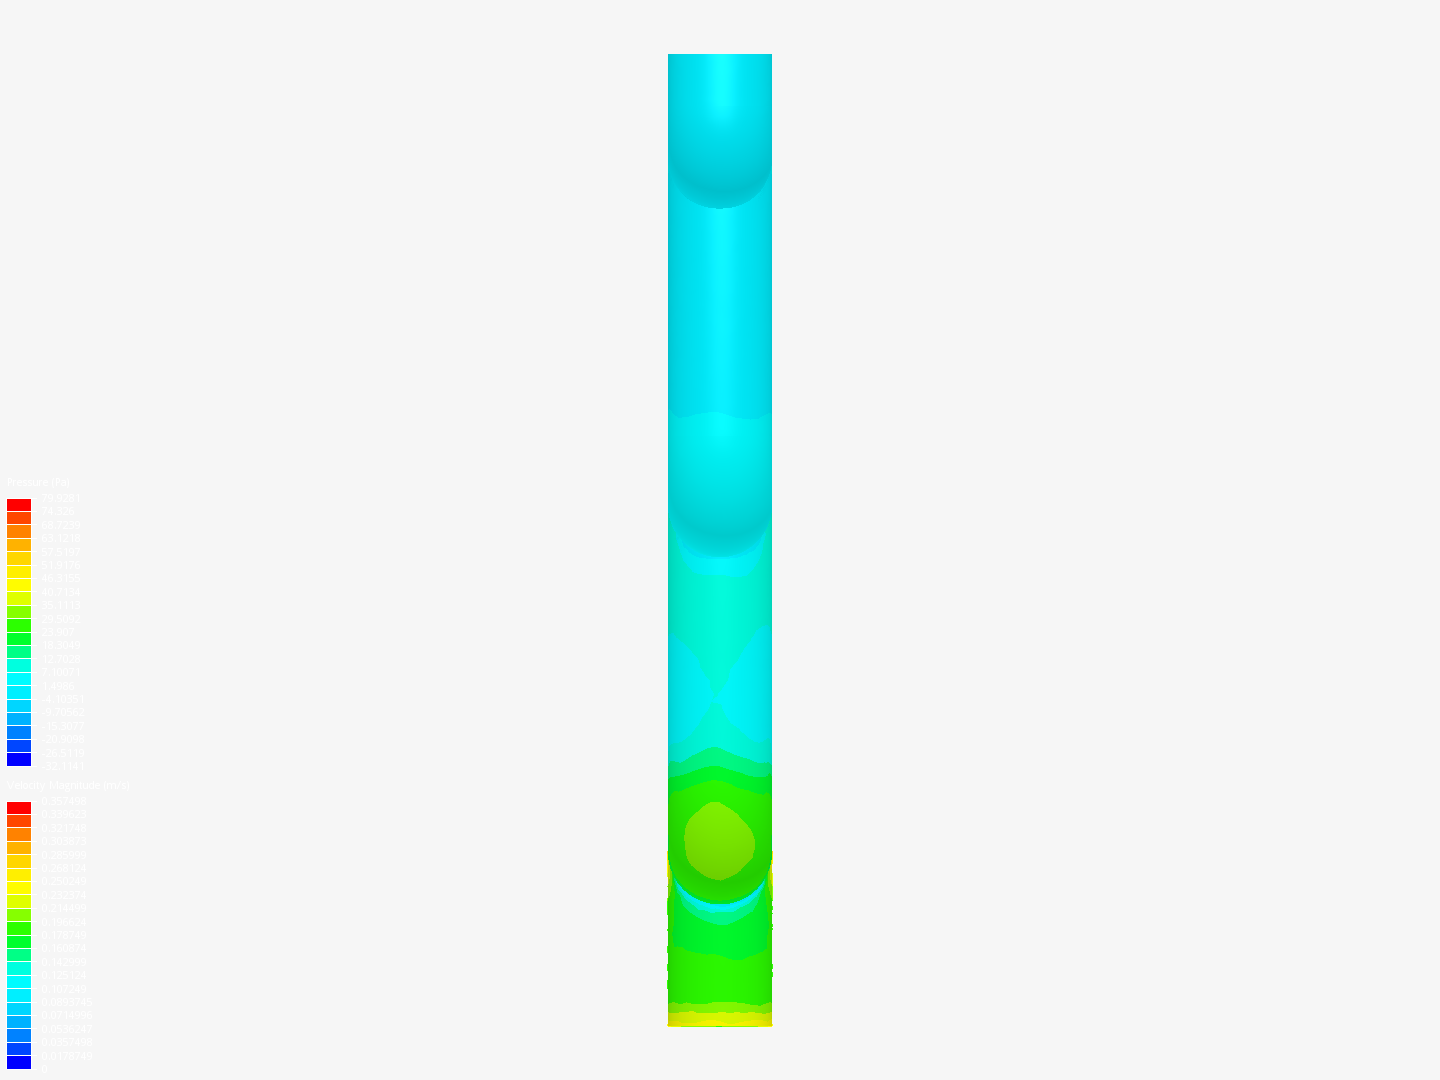 Assignment (a) - CFD image